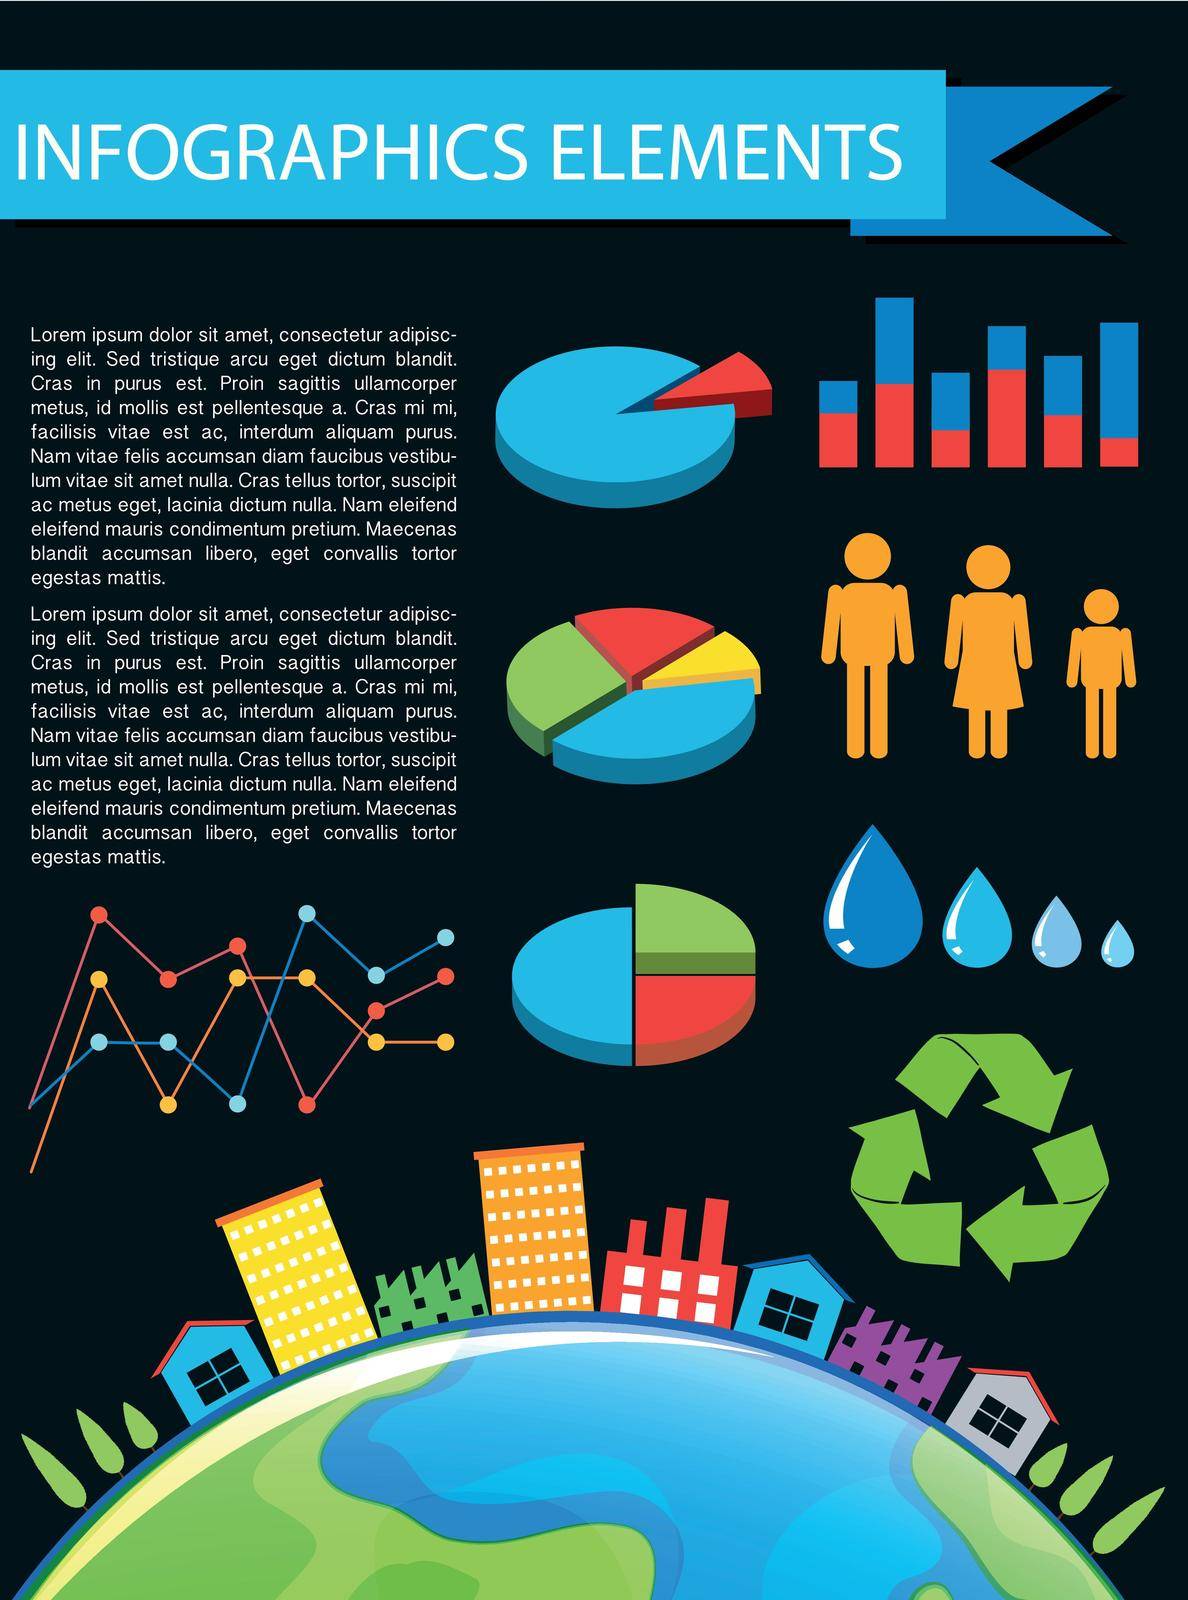 Infographics elements showing the environment